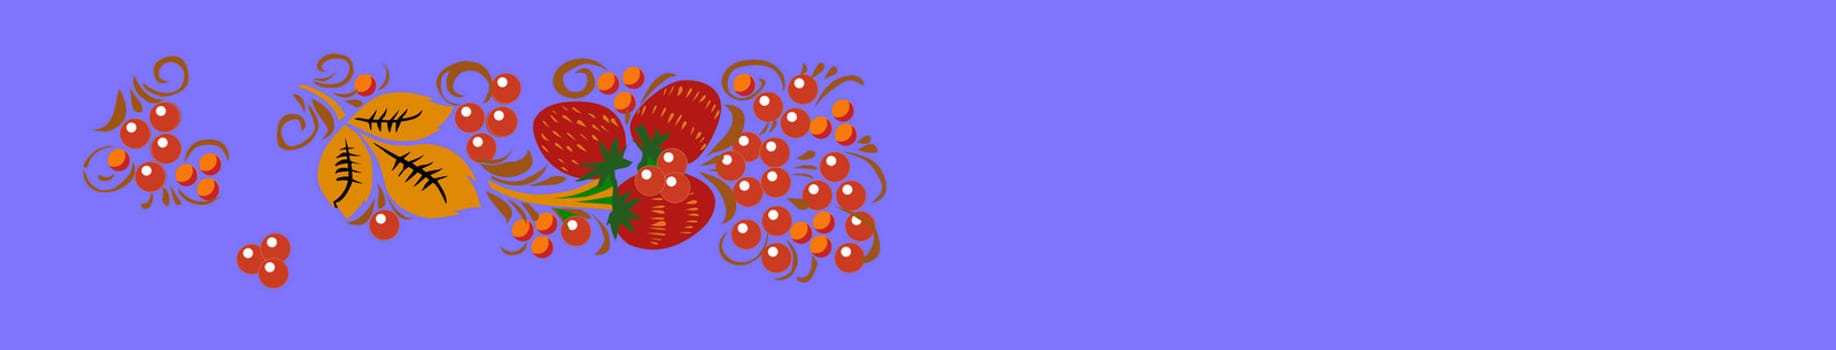 vector drawing of the decorative berries of the strawberries on blue background